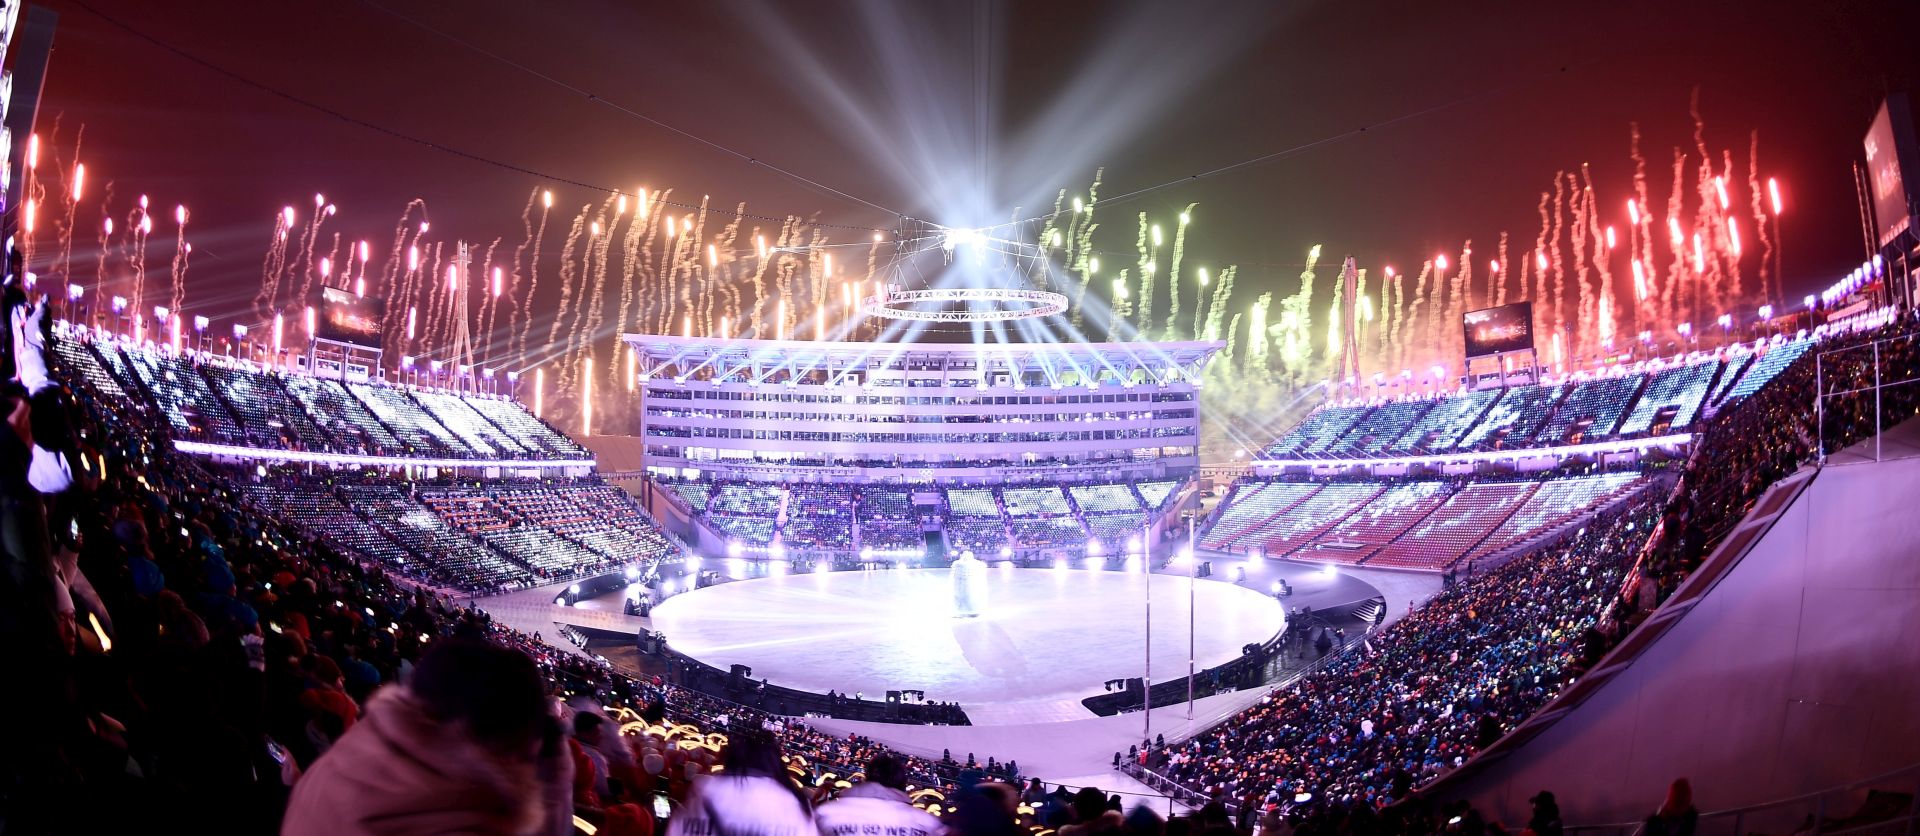 epa06508026 A general view of fireworks during the Opening Ceremony of the PyeongChang 2018 Olympic Games at the Olympic Stadium, Pyeongchang county, South Korea, 09 February 2018.  EPA/CHRISTIAN BRUNA